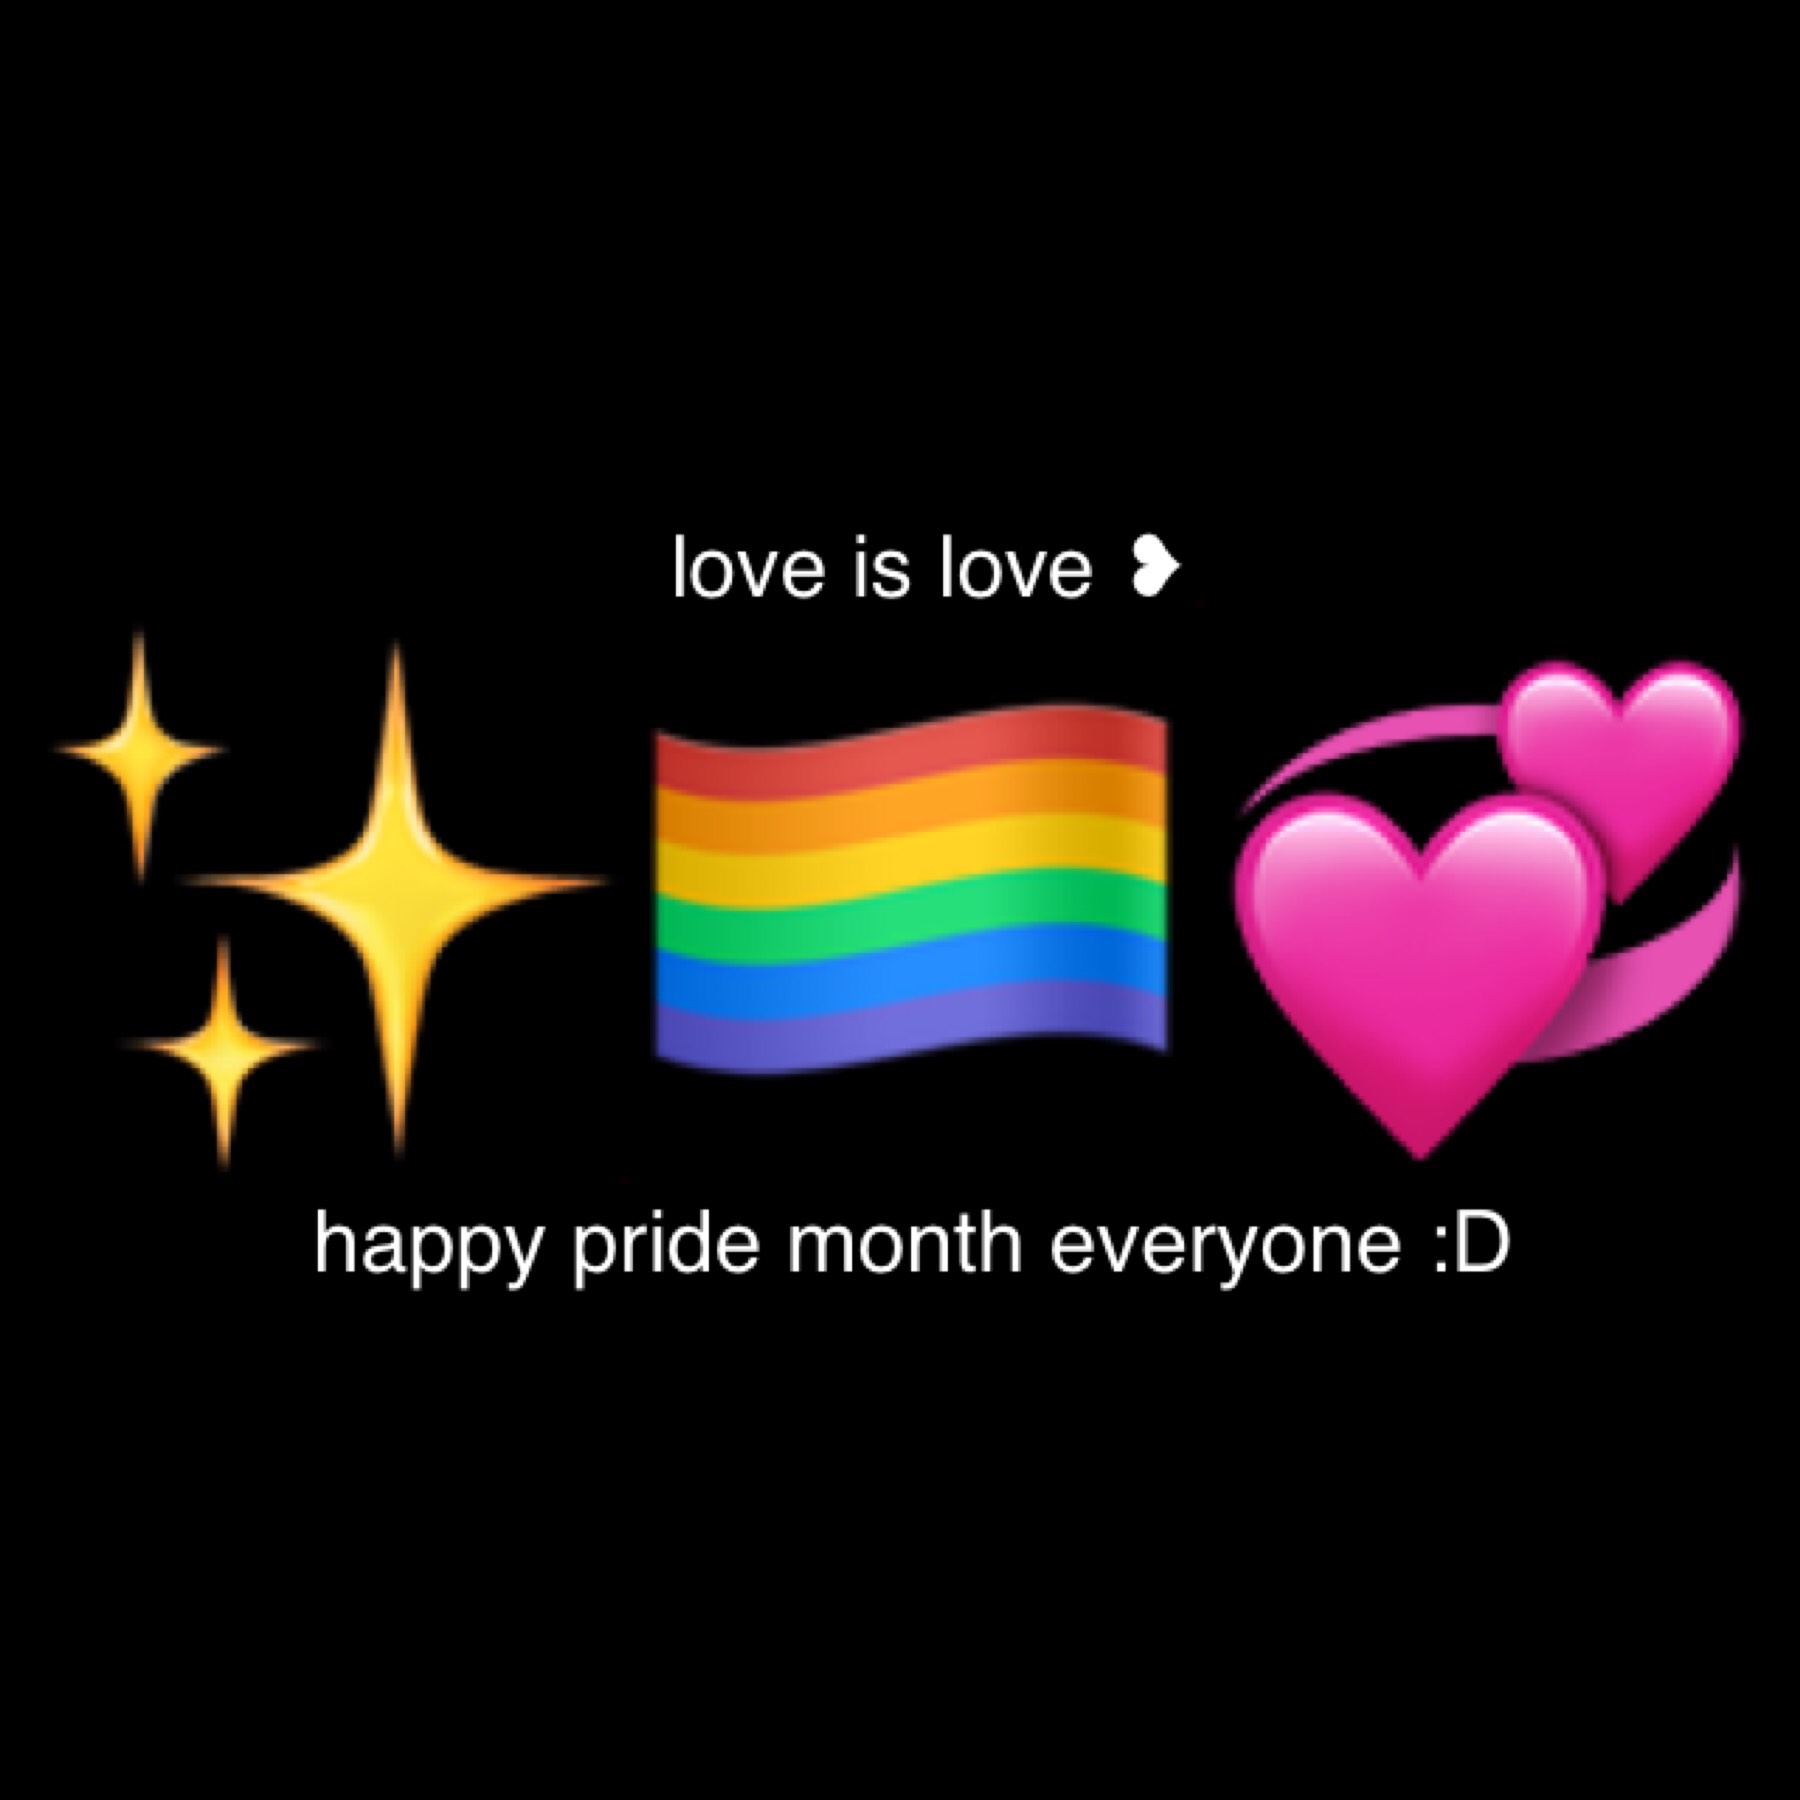 WOO HAPPY PRIDE MONTH GUYS!!

ik i’m not very active on this acc, but y’all can expect some city-themed writing soon for @GemQuotes’s contest! 

super excited for a hopefully productive summer 🤩
